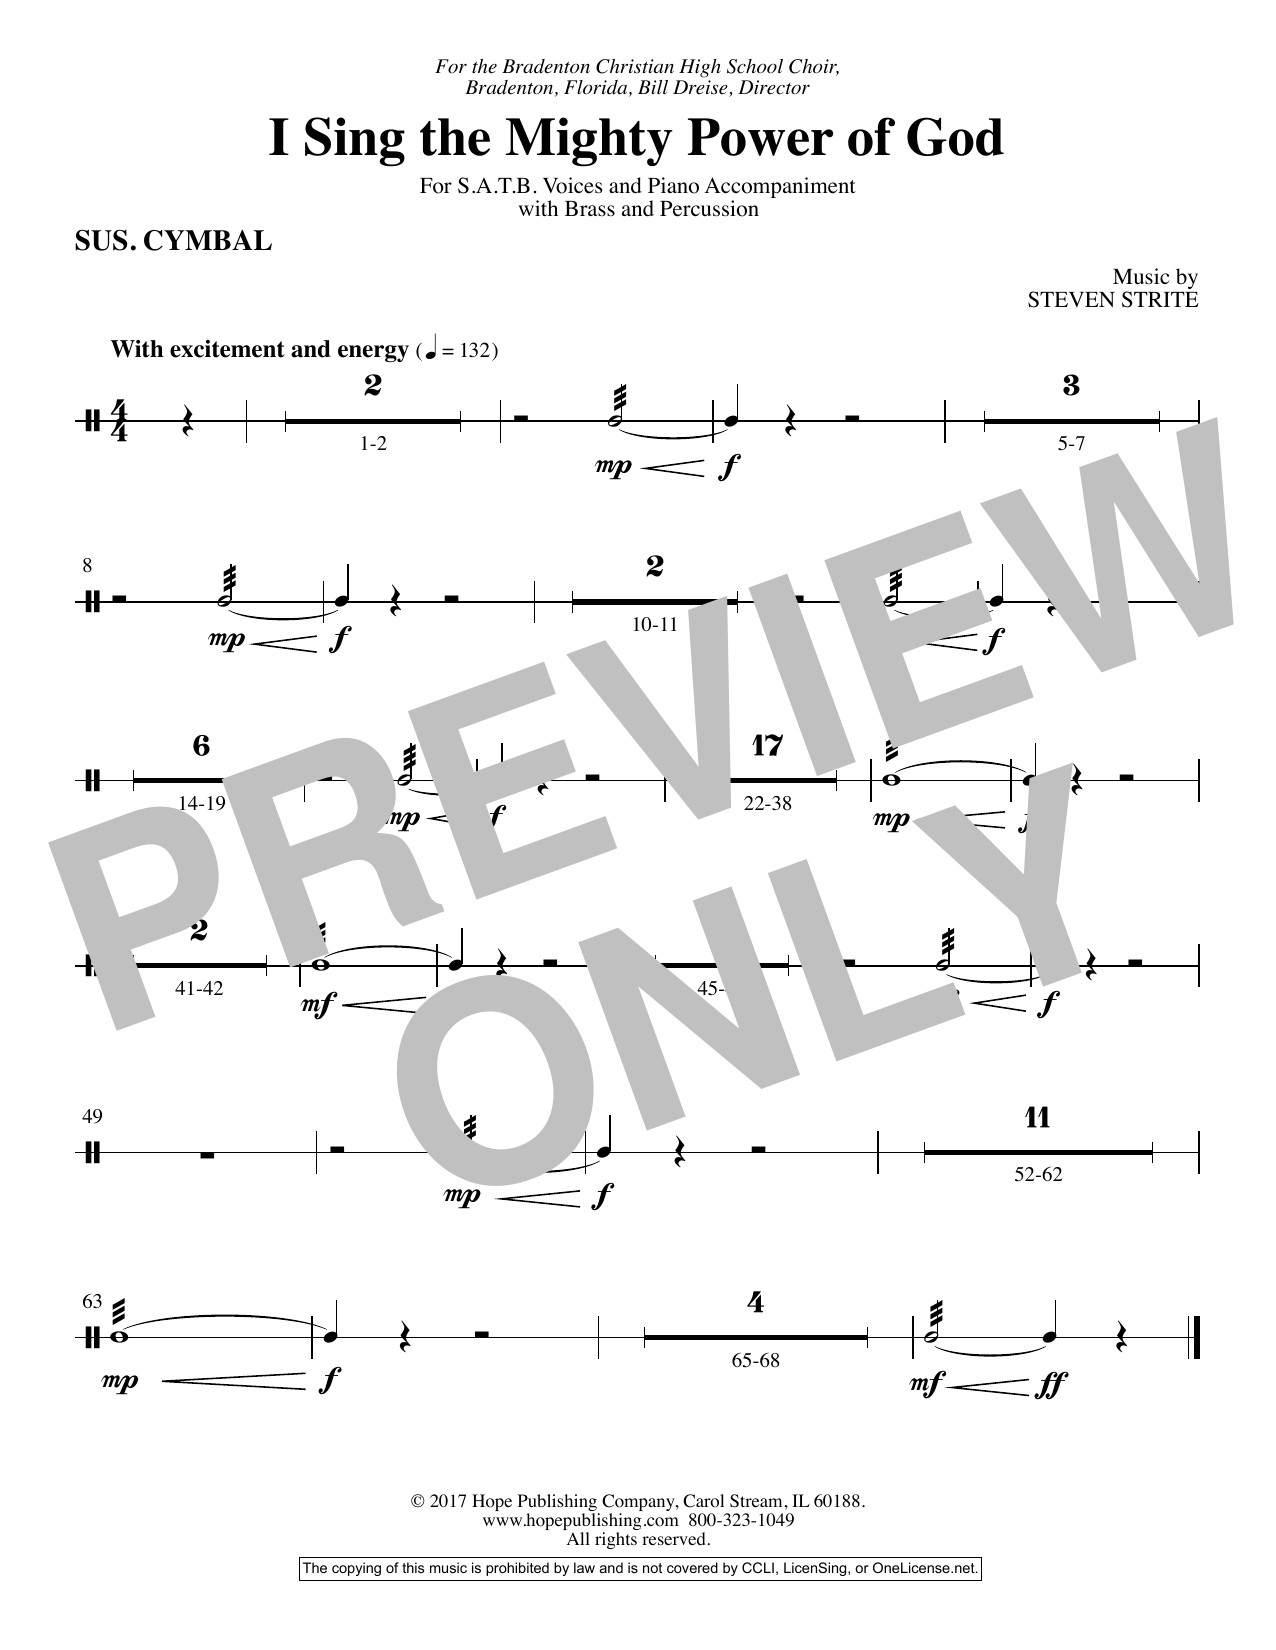 Download Steven Strite I Sing the Mighty Power of God - Bb Tru Sheet Music